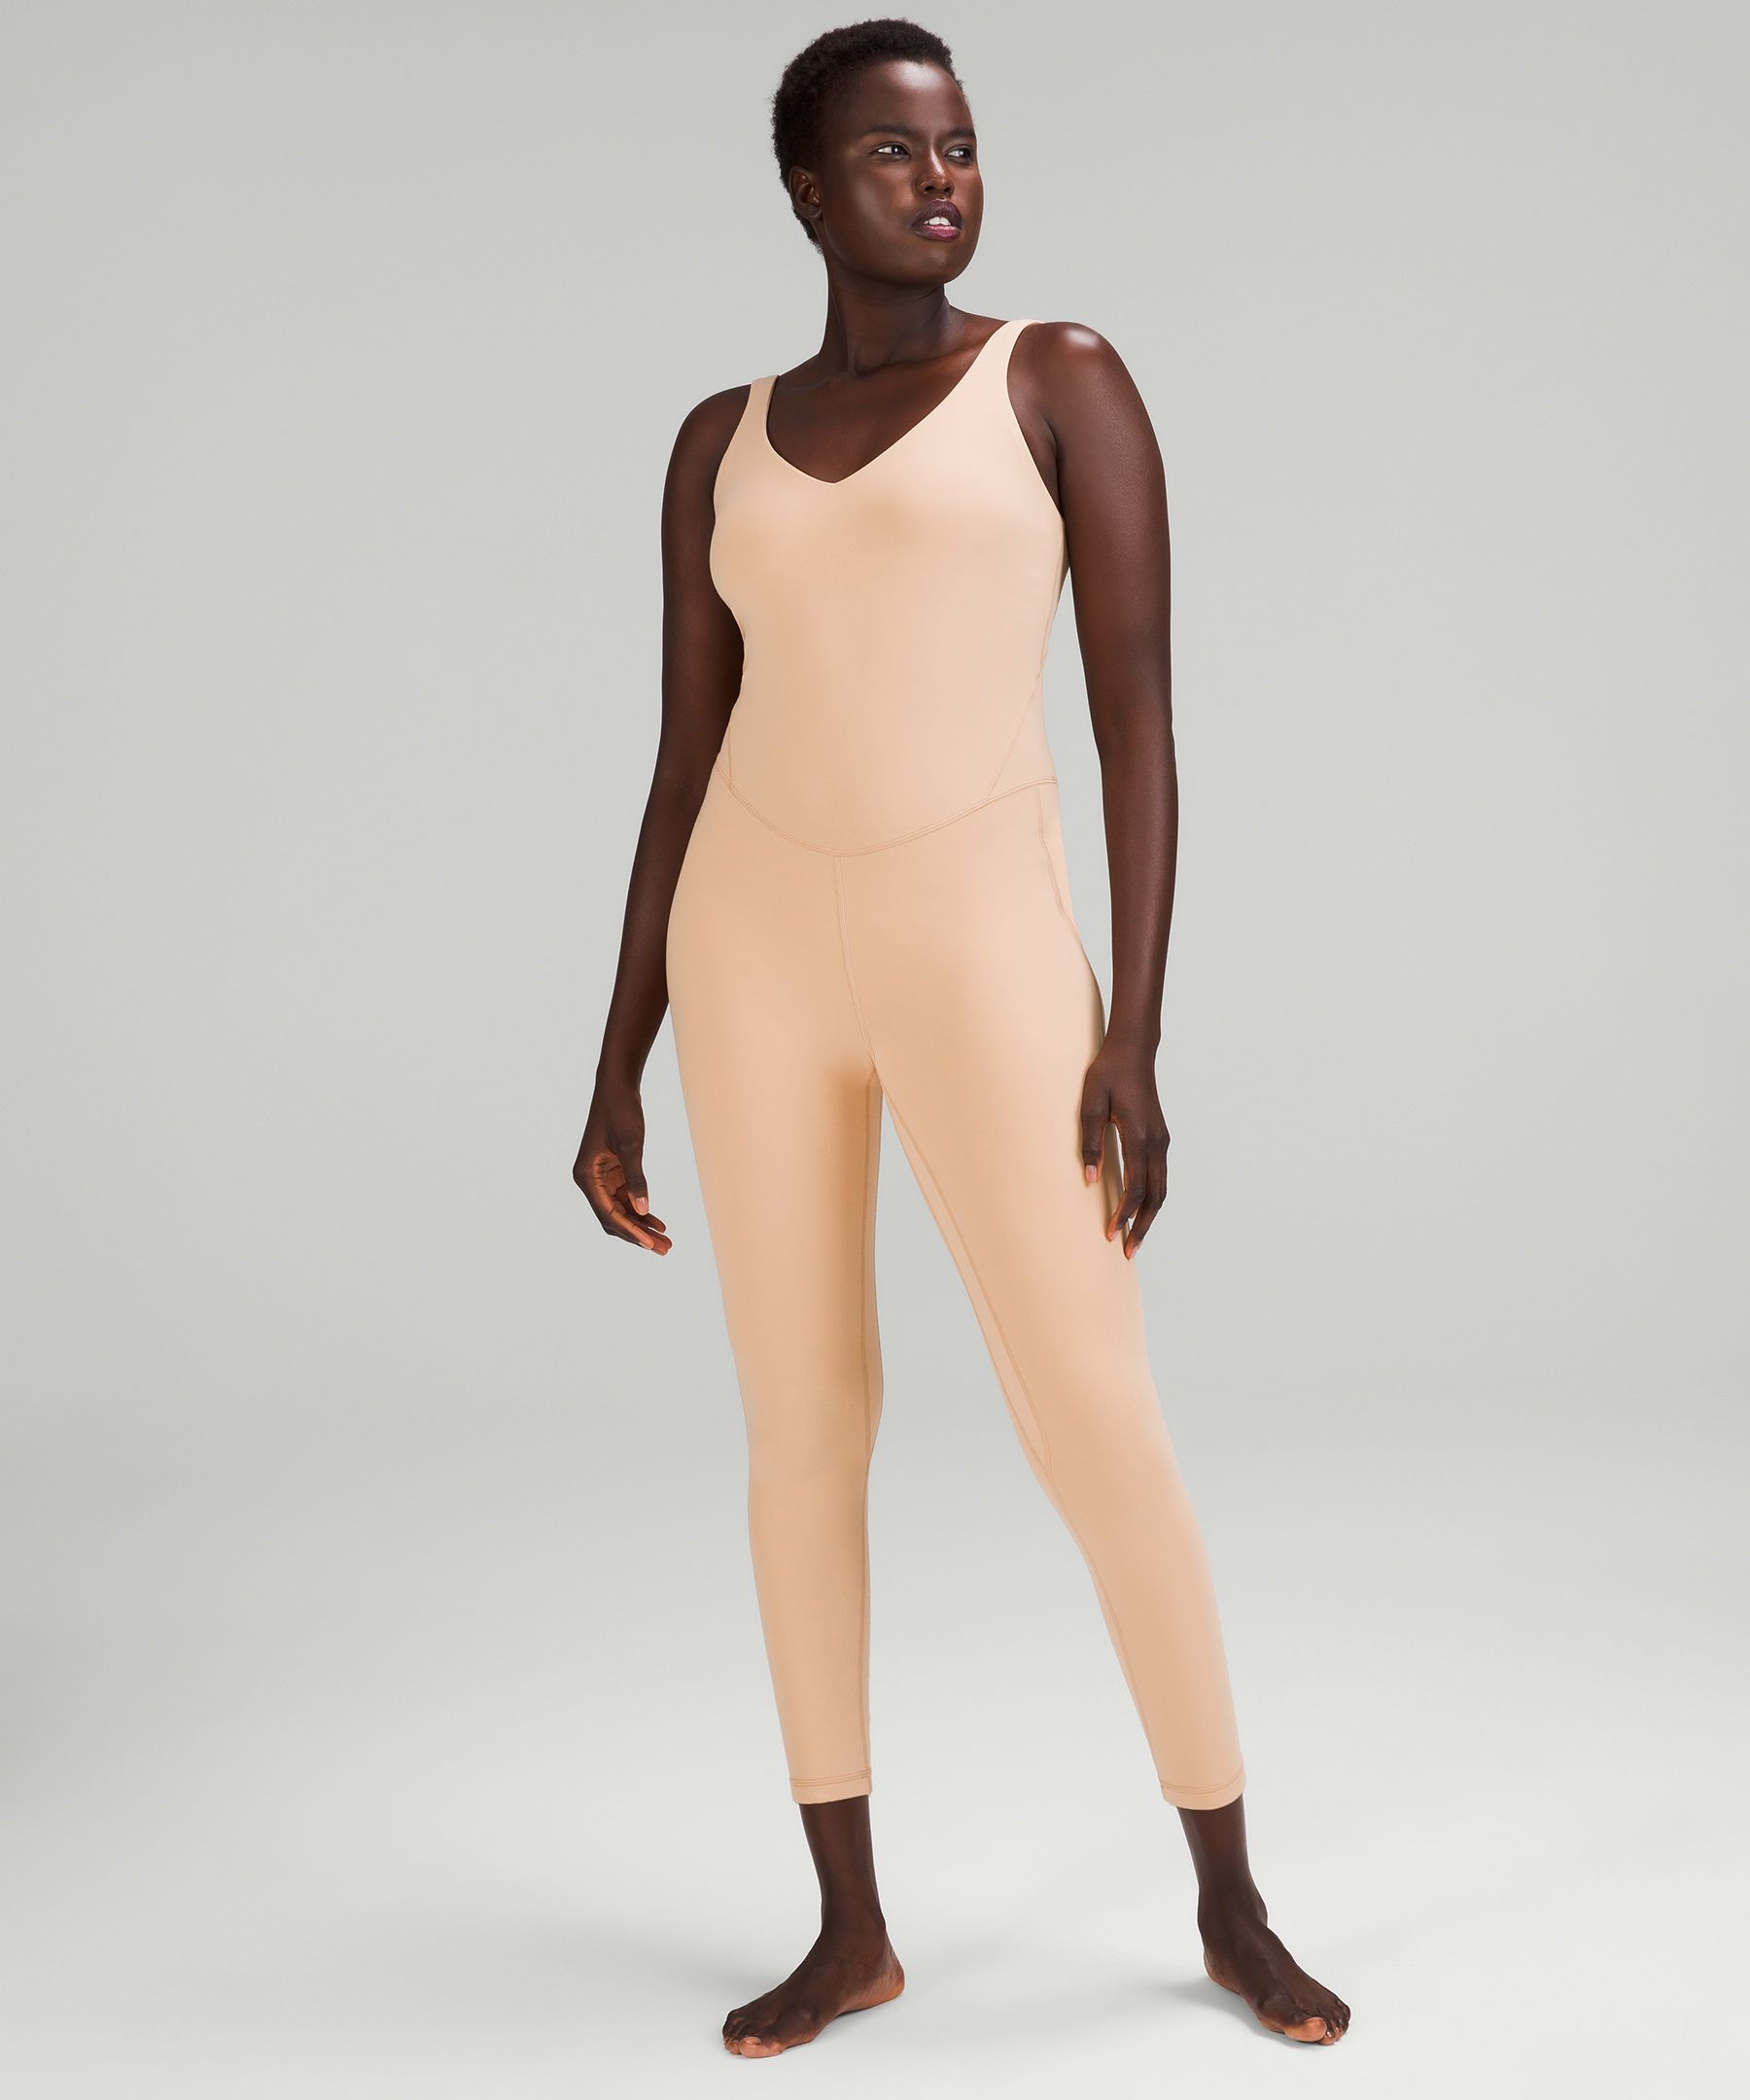 Align bodysuit in white opal from WMTM 🤍 would go perfect with a french  press scuba or define.. come on lulu 🙏🏼 : r/lululemon